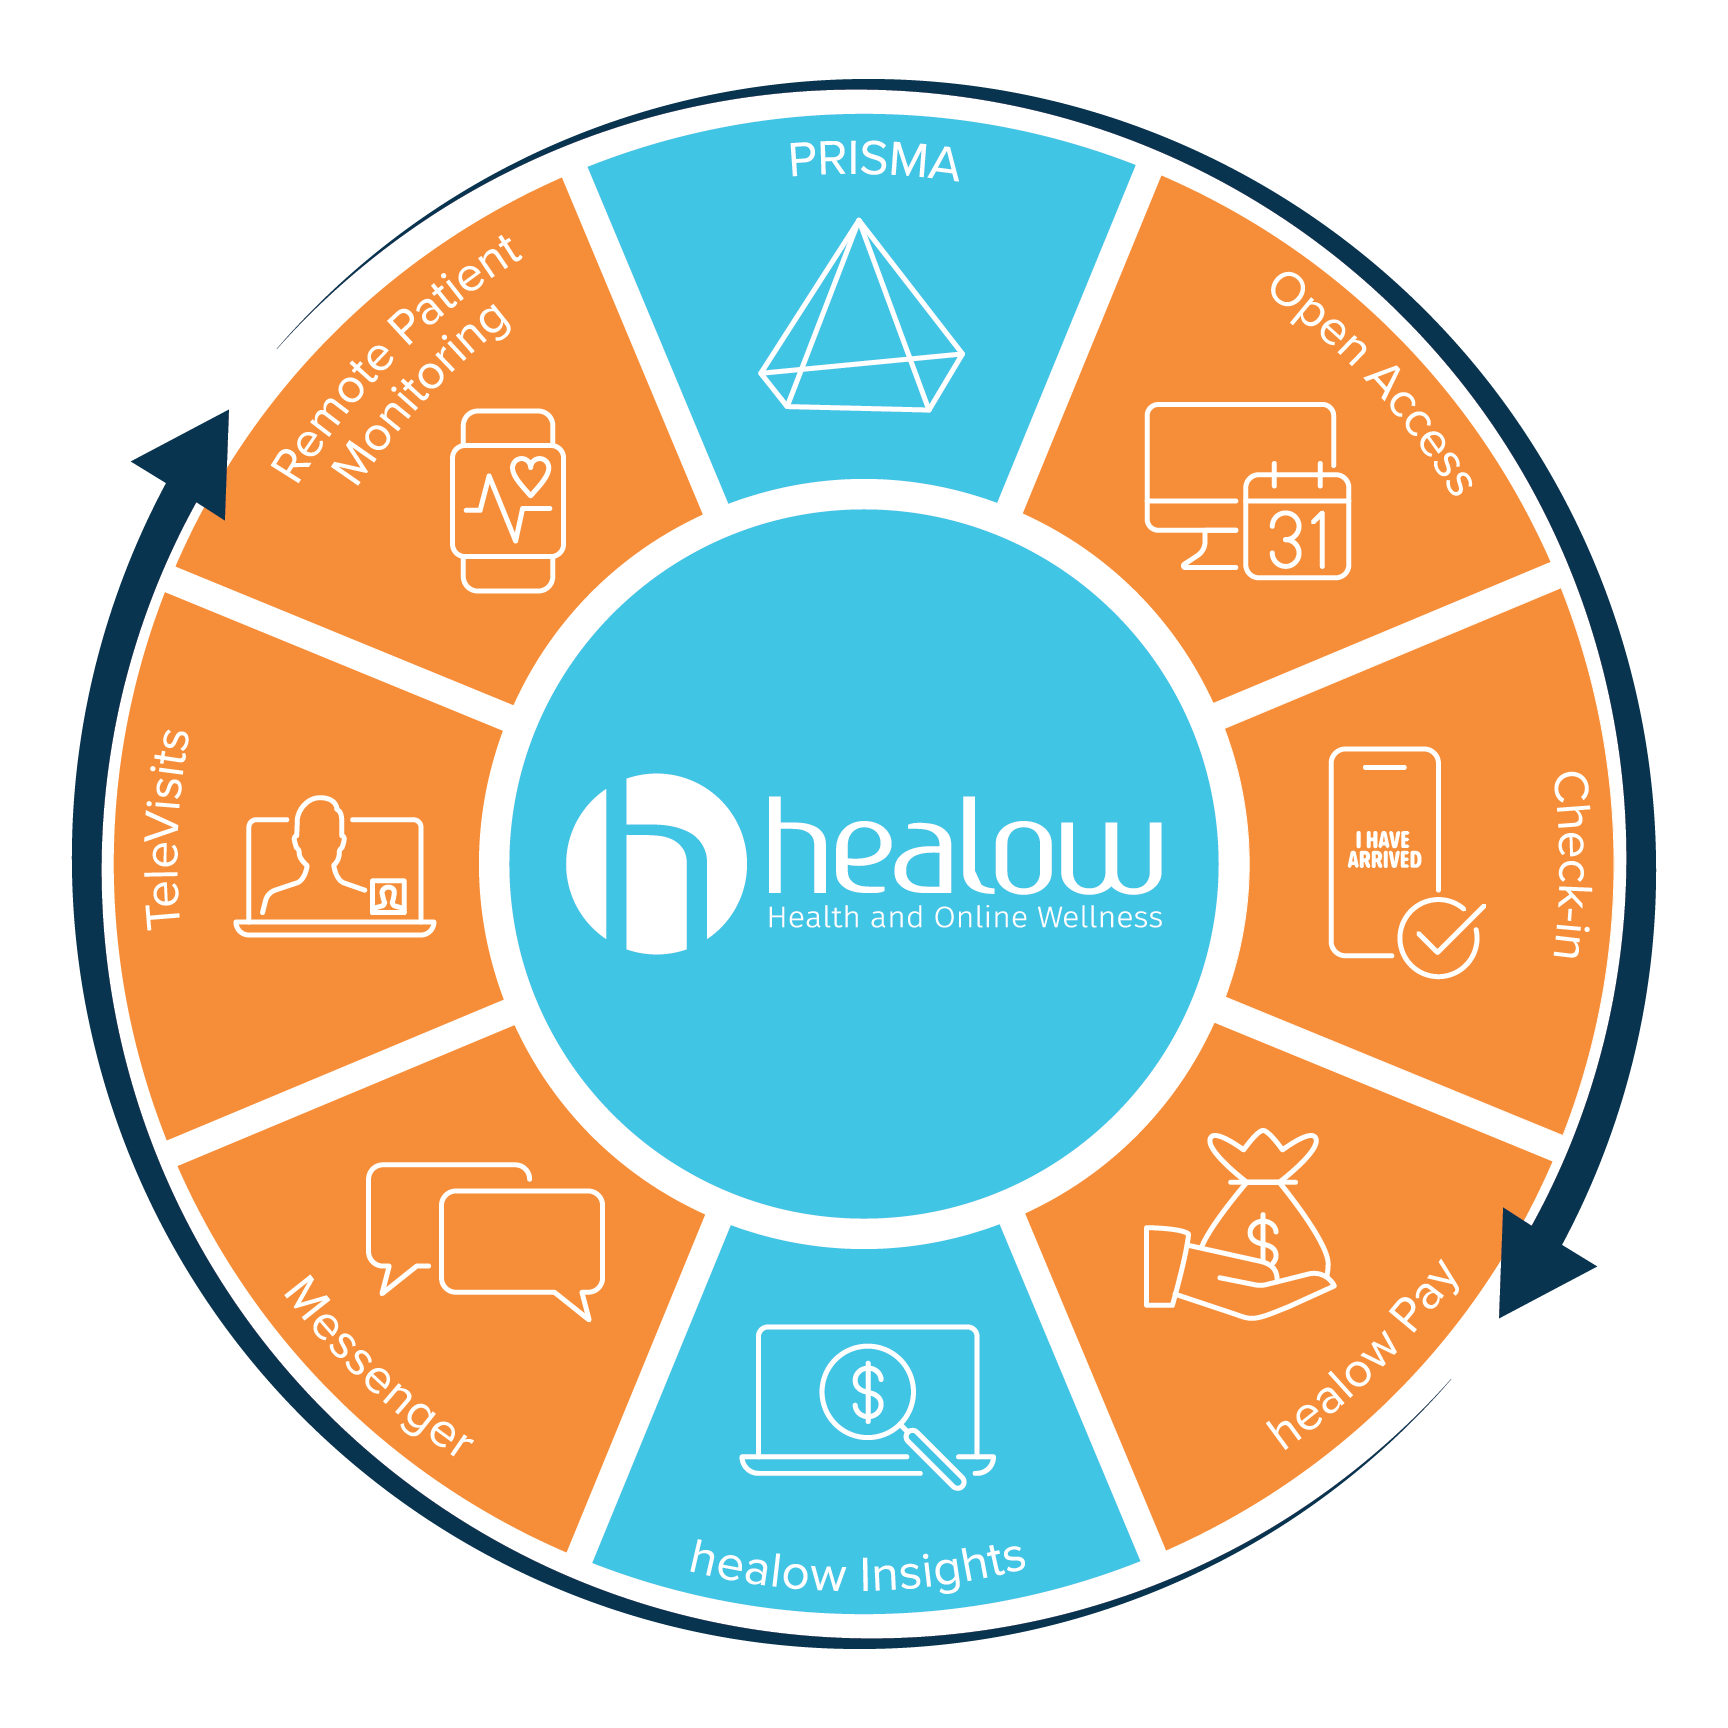 graphic depicting all healow plus offerings in the shape of a circle